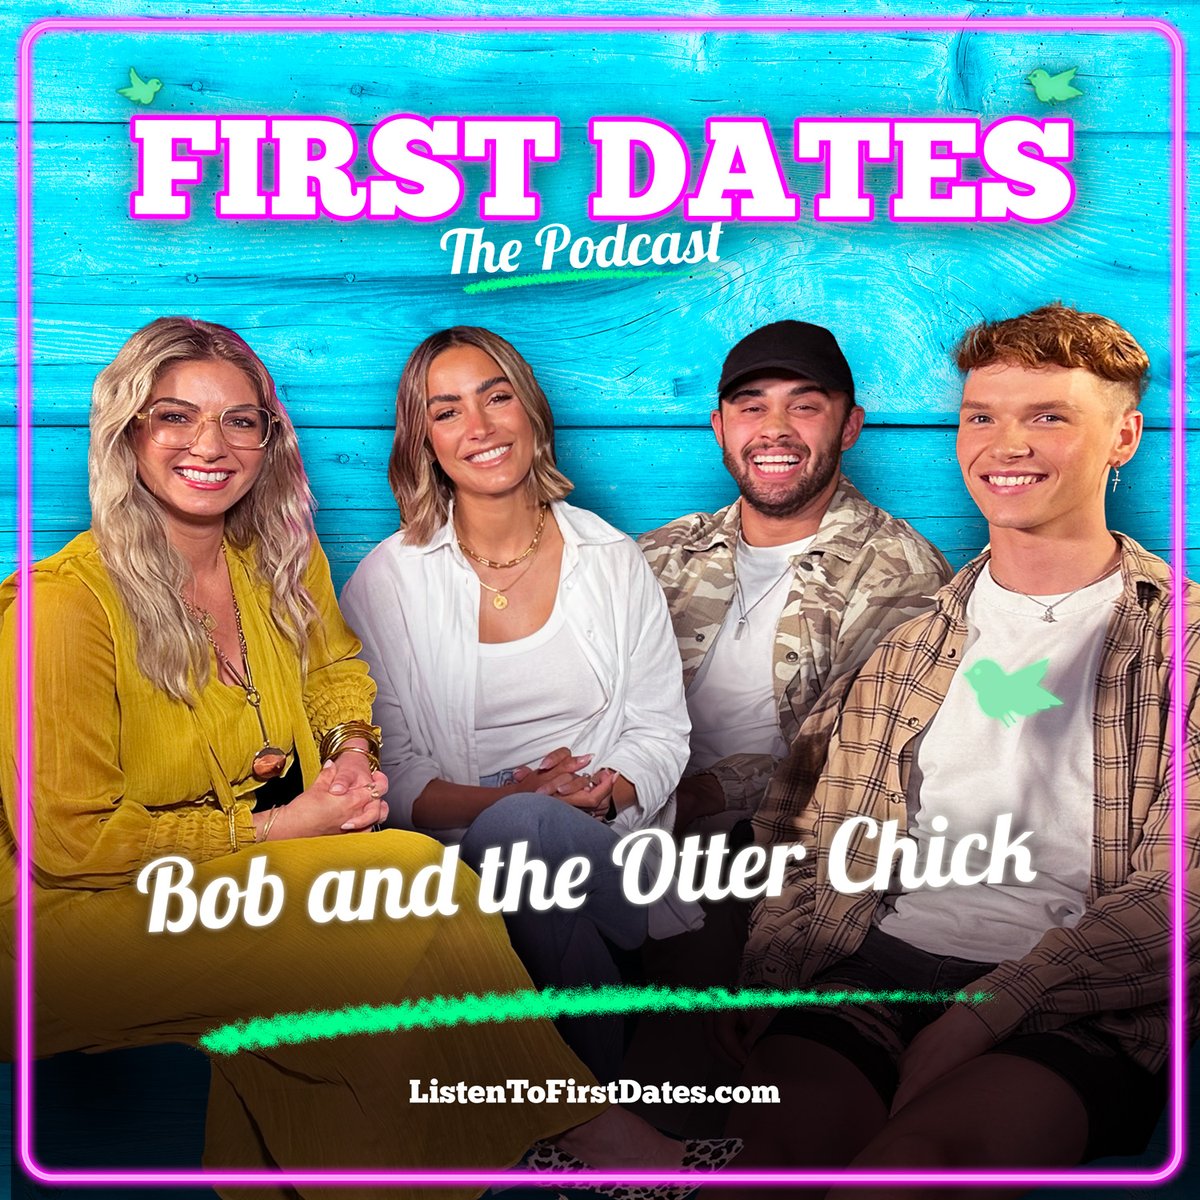 🚨 NEW FIRST DATES: THE PODCAST 🚨 including beige flags, ex-boyfriends looking for hook-ups, & chasing something you don't want. Listen to the new episode now: listentofirstdates.com #FirstDatesThePodcast #FirstDates #Love #Dating @frankiebridge @CiCi_Coleman